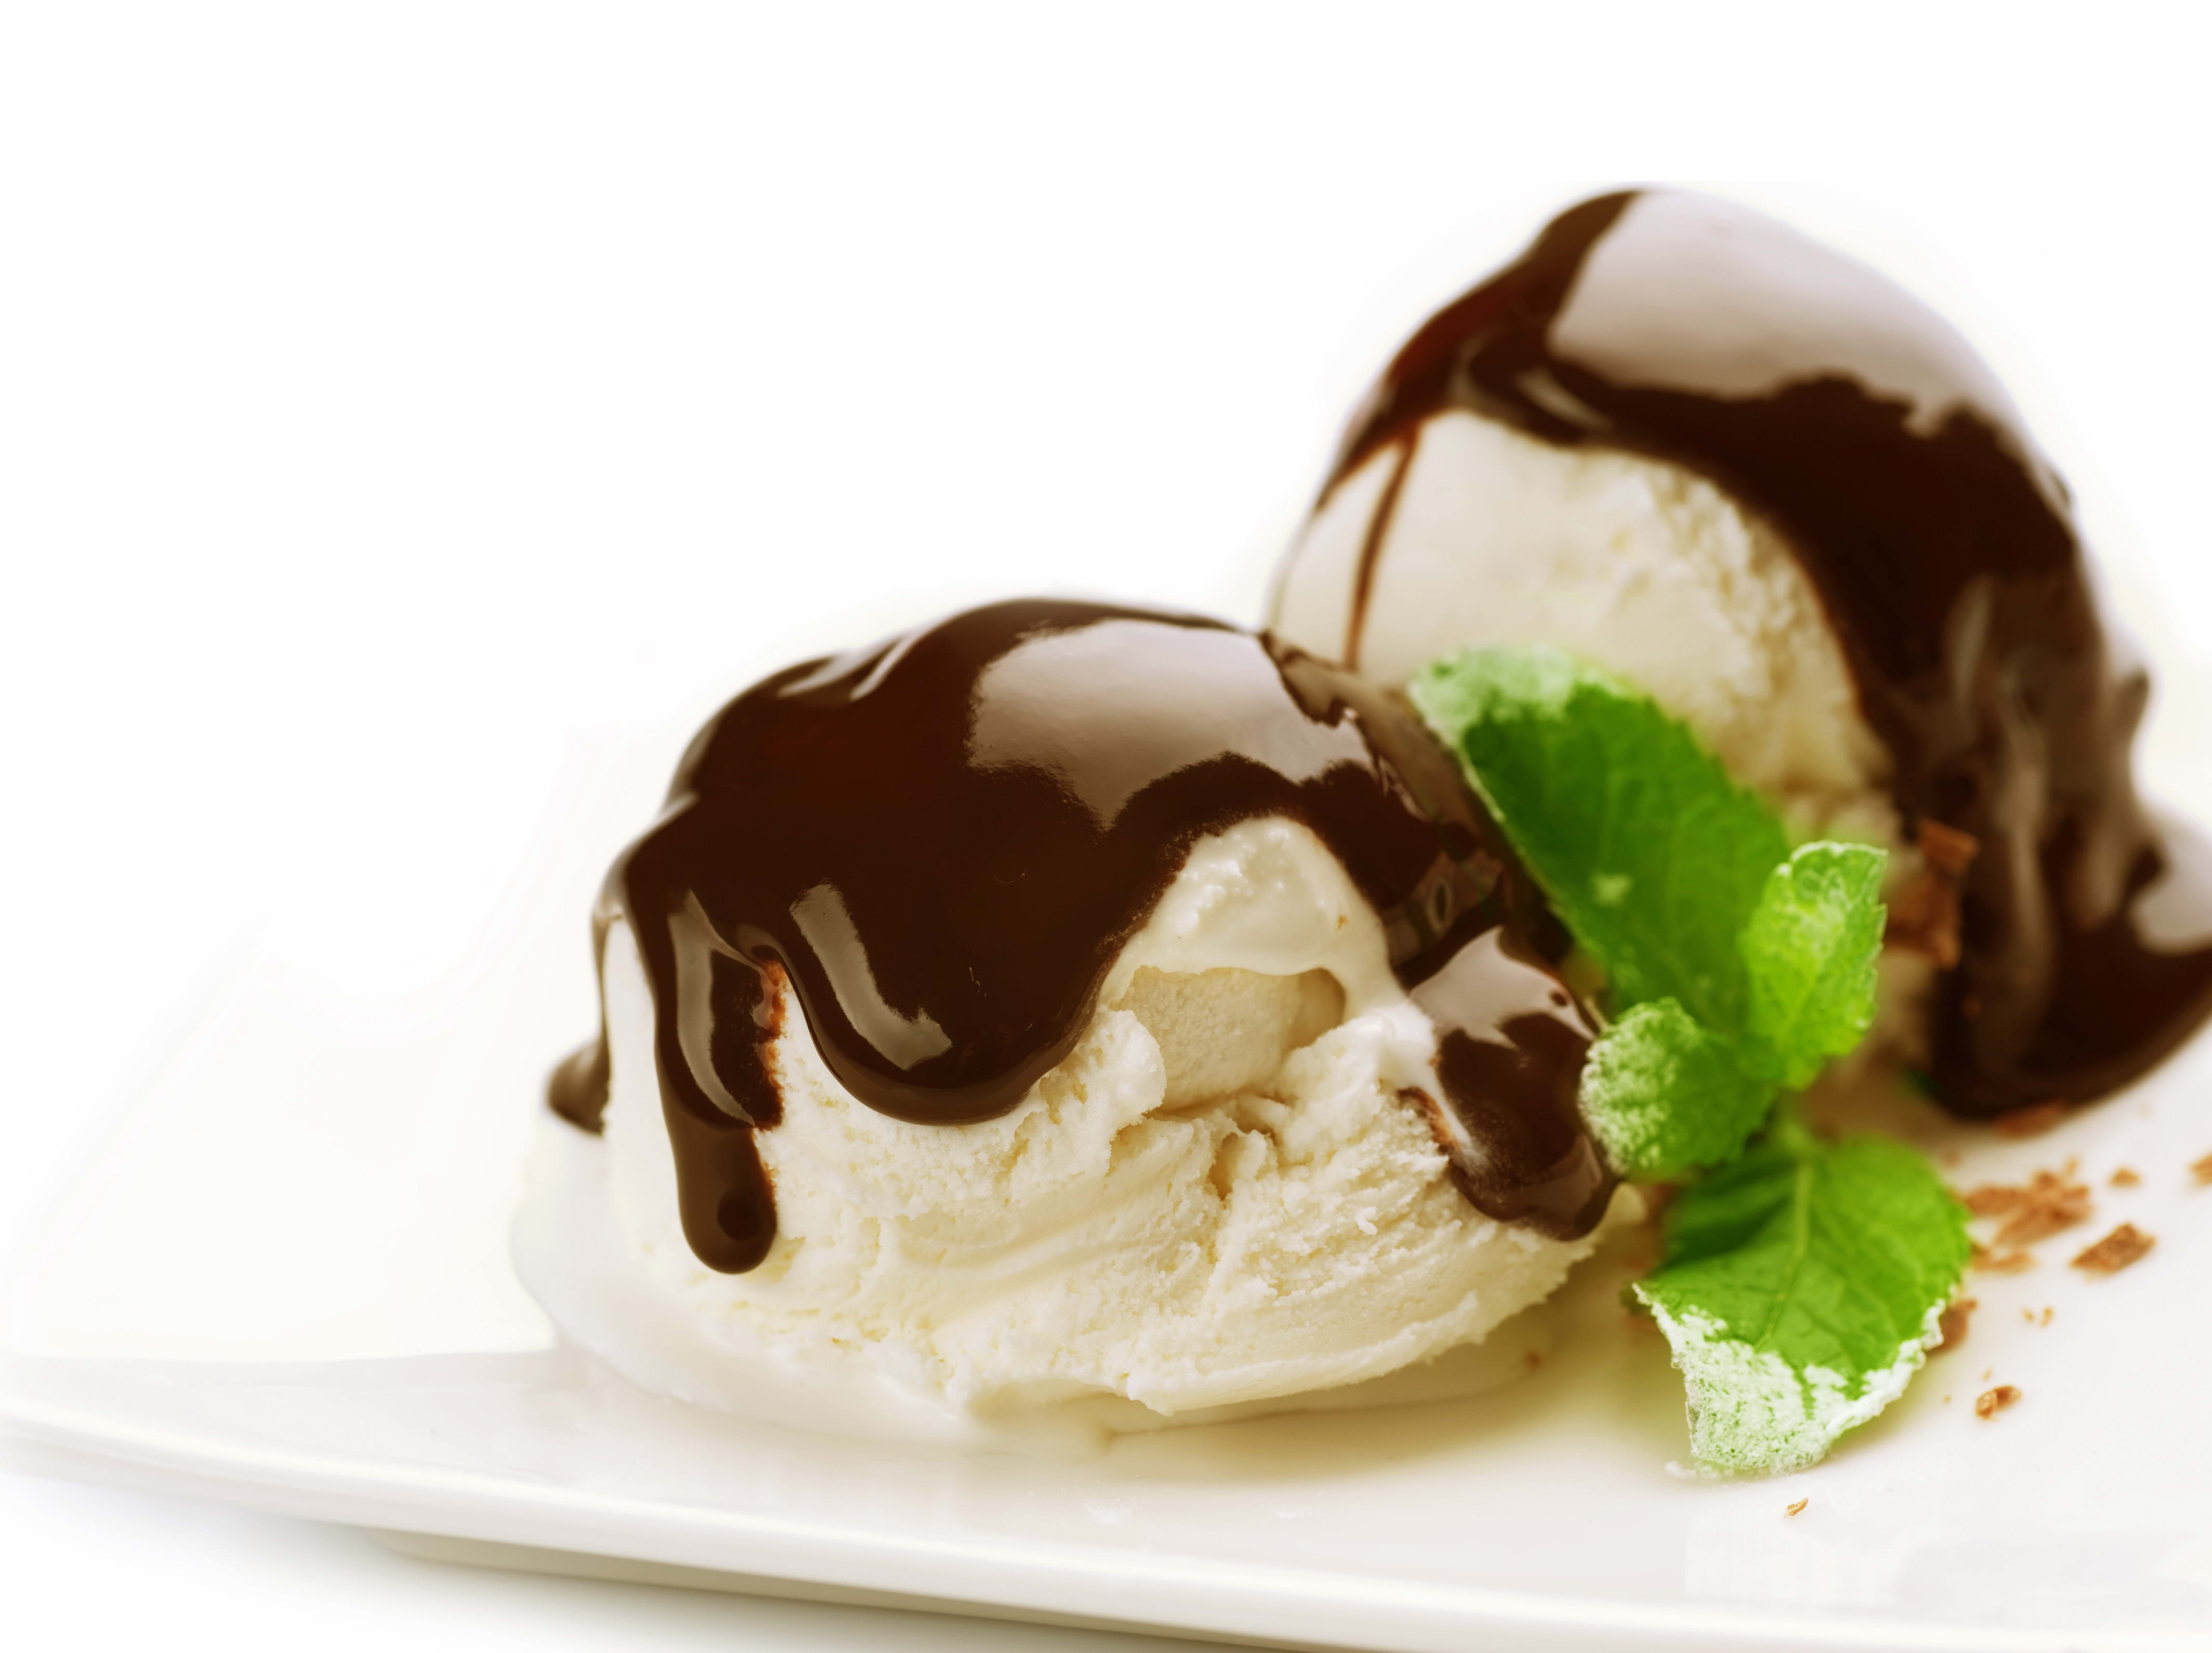 Wallpaper Ice Cream Chocolate Leaves Plate White Background